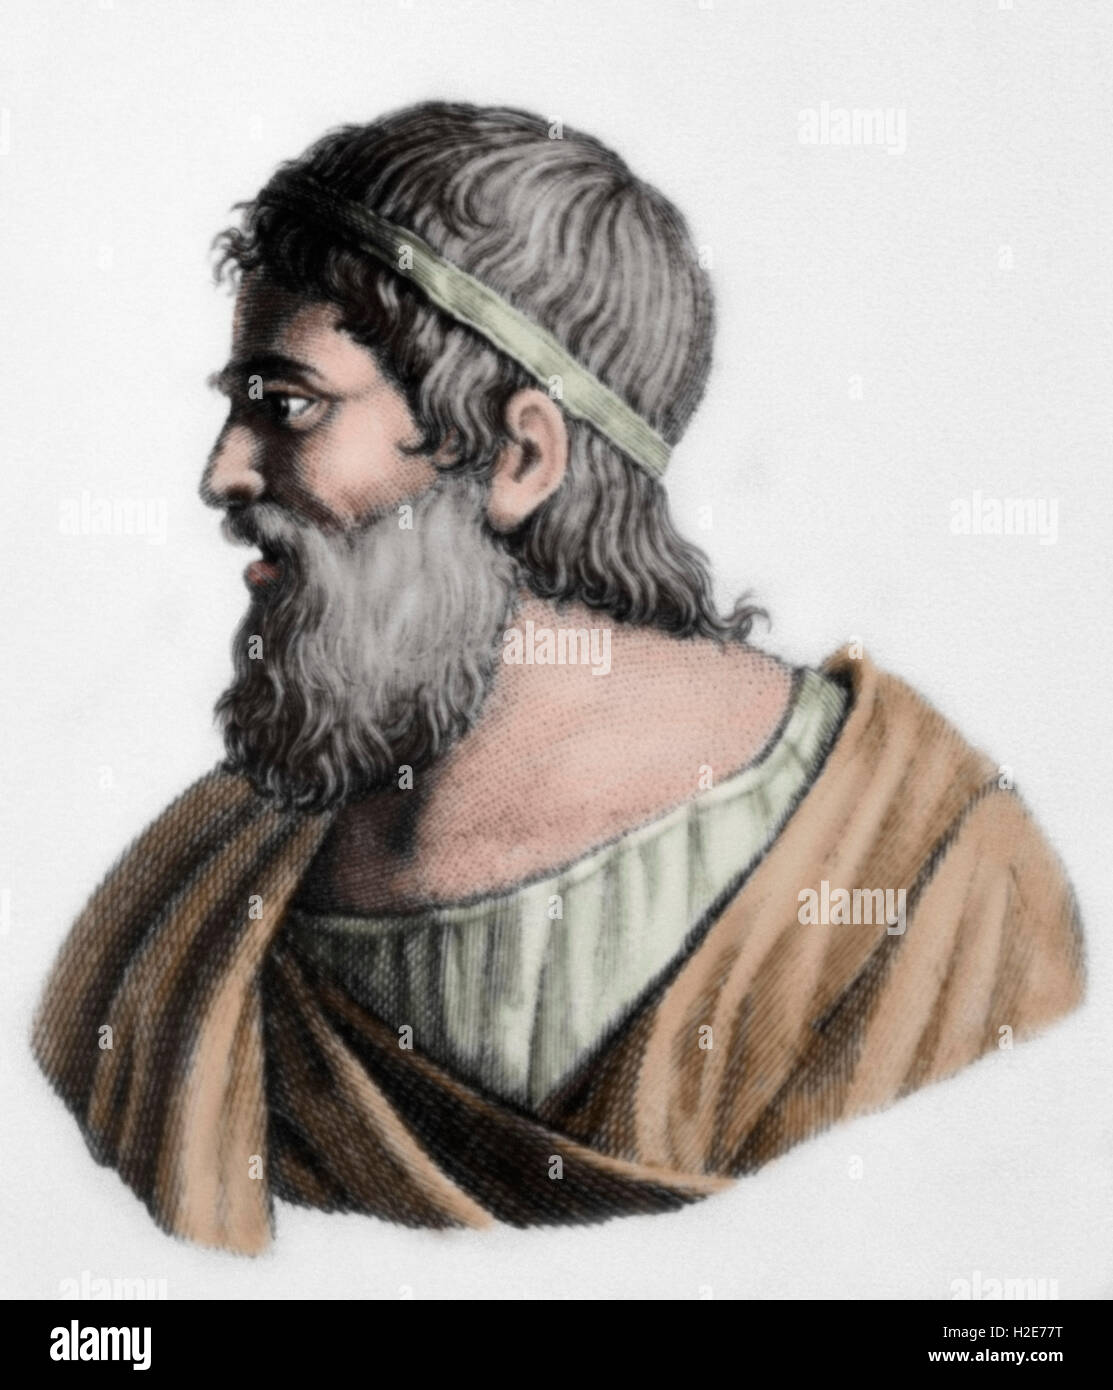 Archimedes (Syracuse-Syracuse-287, -212). Greek mathematician, physicist, engineer, inventor, and astronomer. Portrait. Engraving. Colored. Stock Photo